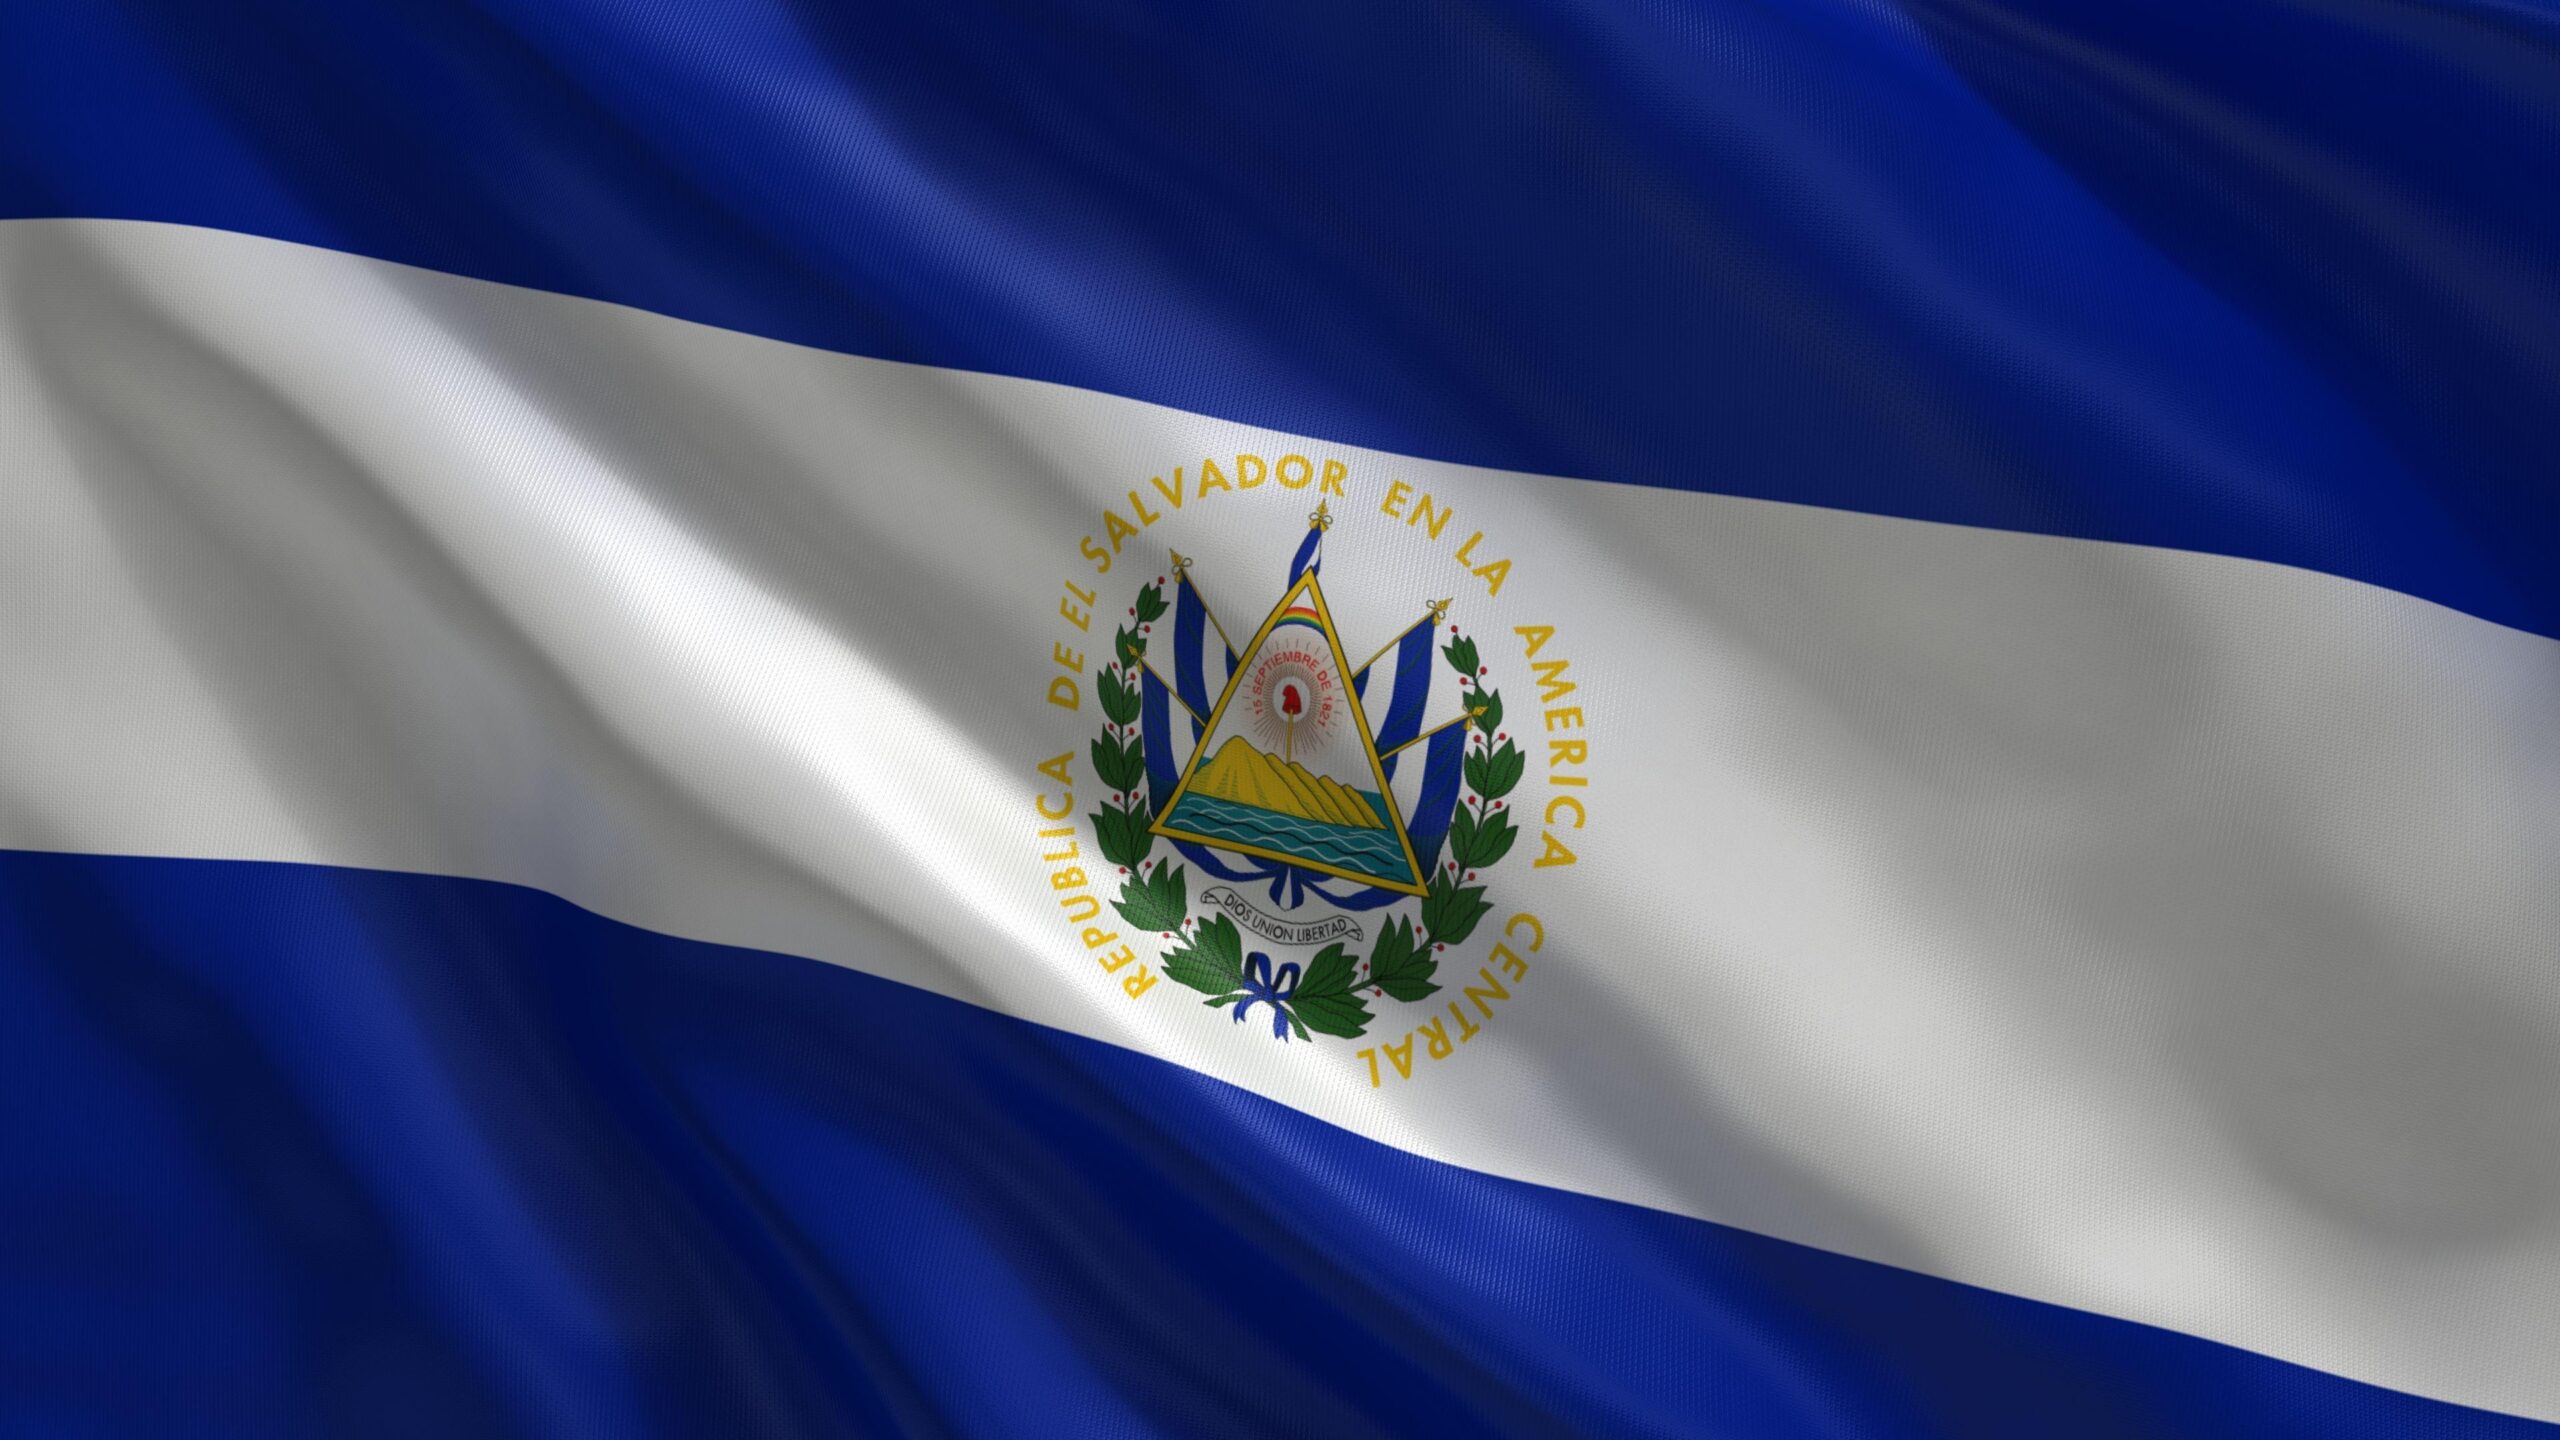 This is the national flag of El Salvador It has two colors, blue